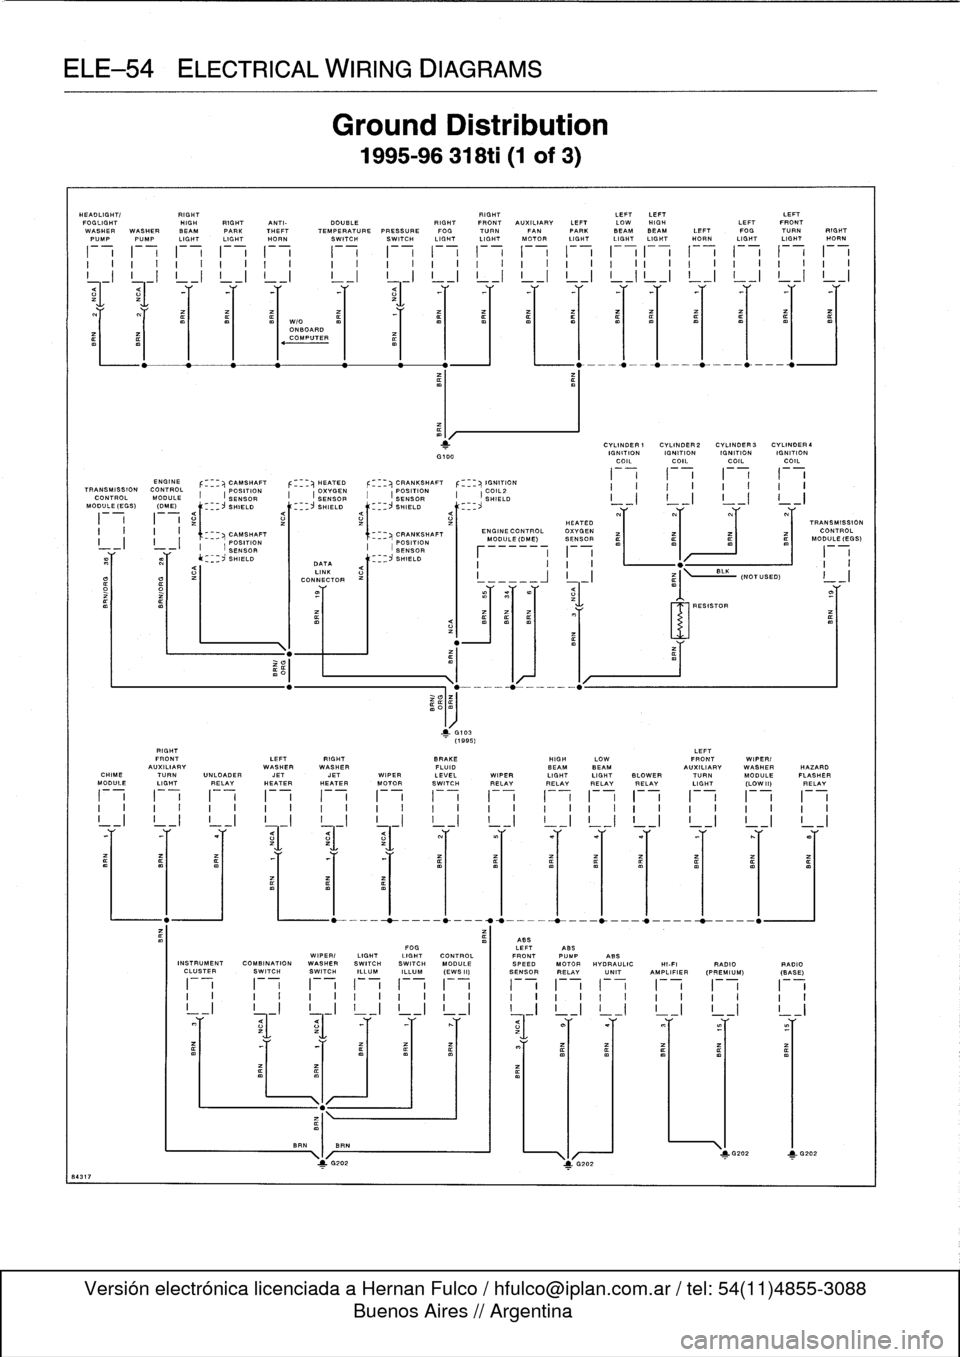 BMW 328i 1997 E36 Owners Manual 
ELE-54
ELECTRICAL
WIRING
DIAGRAMS

HEADLIGHT/

	

RIGHT

	

RIGHT

	

LEFTLEFT

	

LEFT
FOGLIGHT

	

HIGH
RIGHT
ANTI-

	

DOUBLE

	

RIGHT
FRONT
AUXILIARY
LEFT
LOW
HIGH

	

LEFT
FRONT
WASHER
WASHER
B